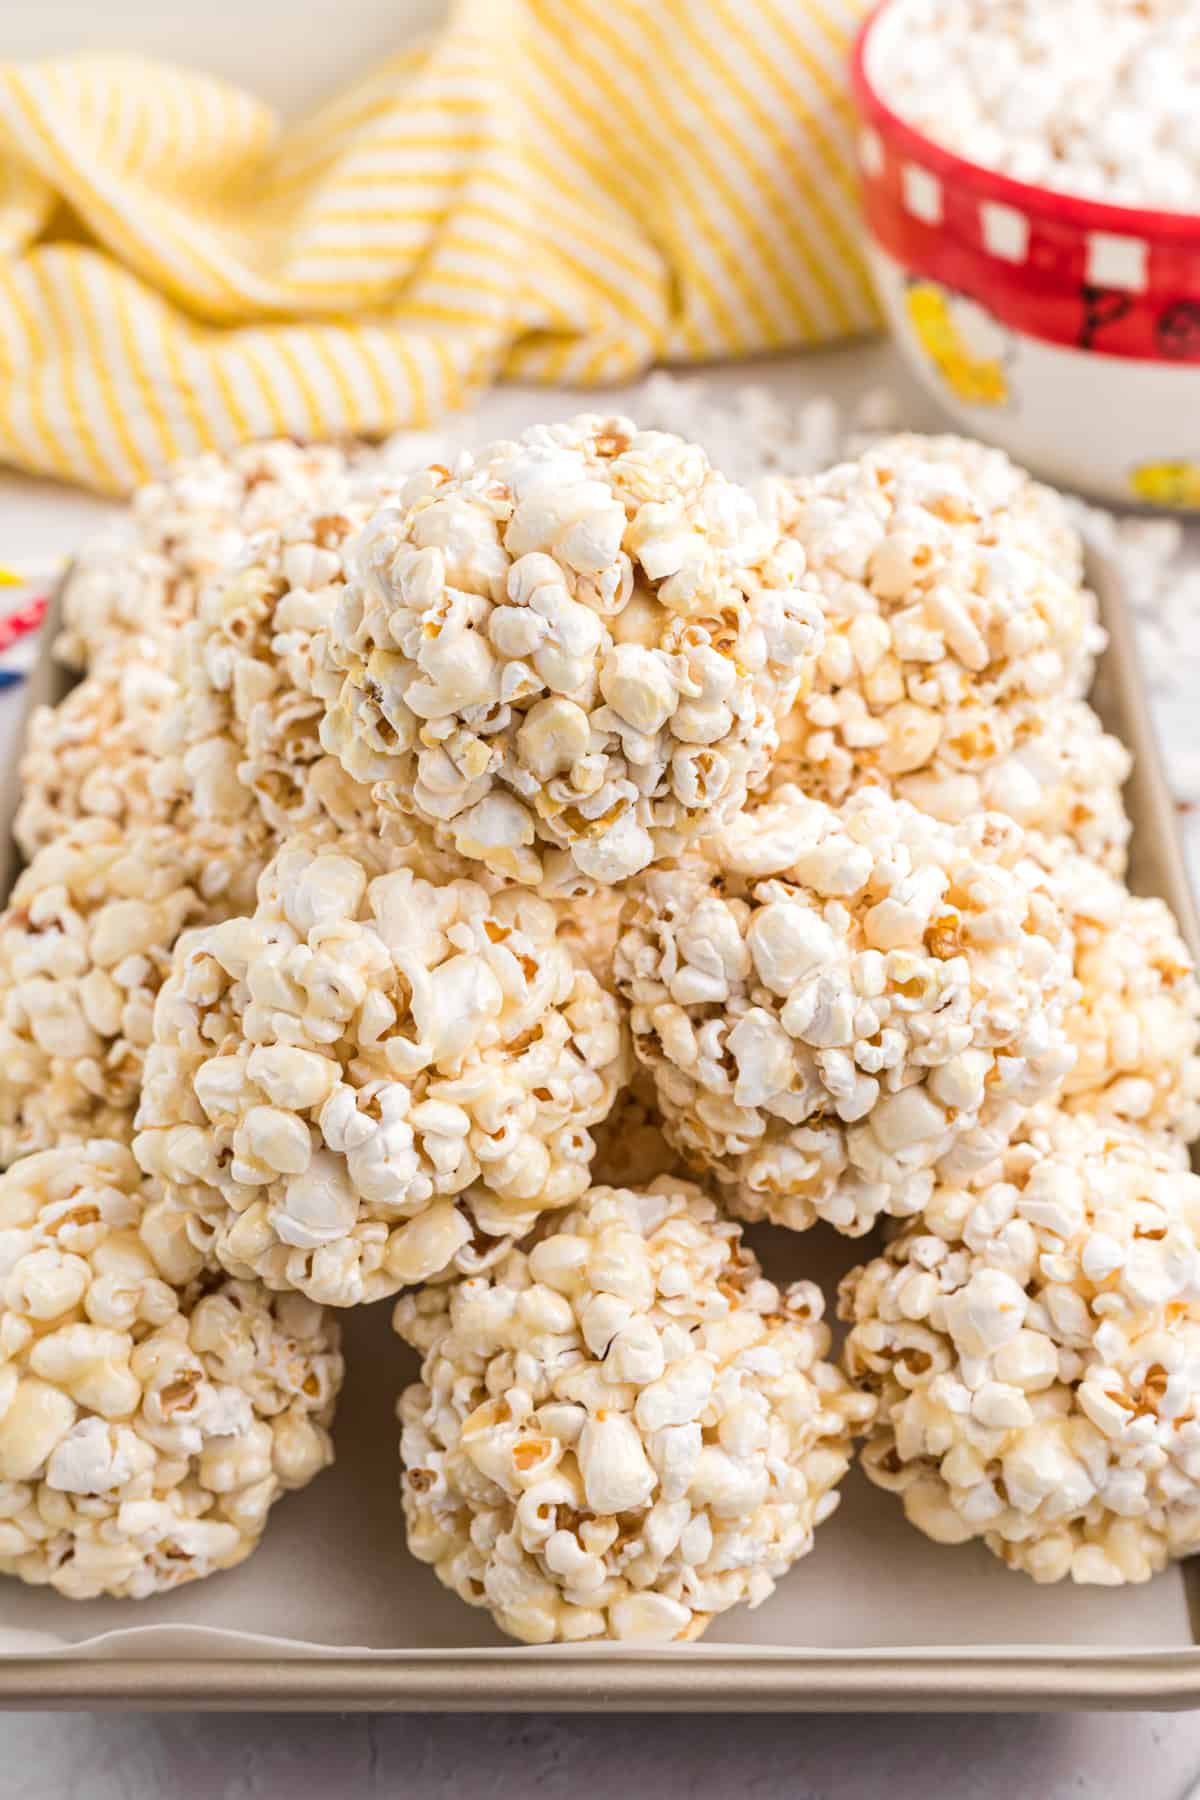 A pile of popcorn balls is presented on a tray.